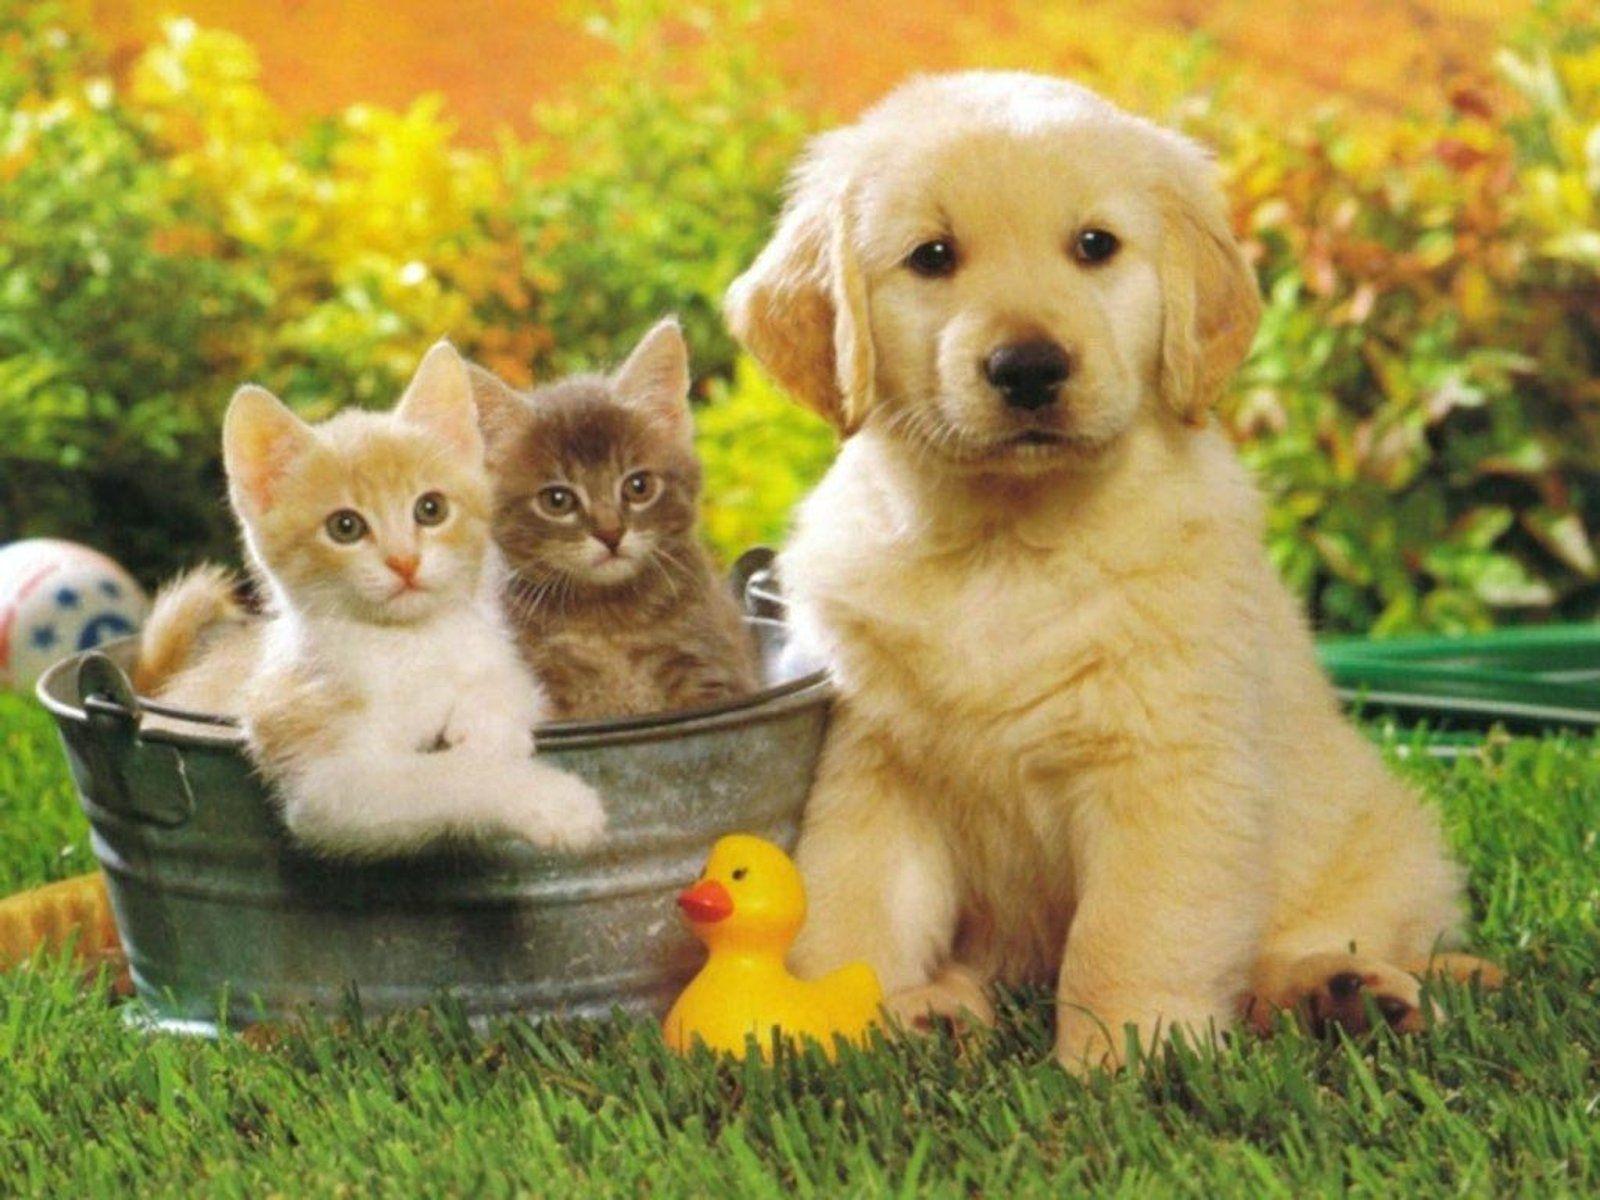 Kitten and Puppy Wallpapers - Top Free